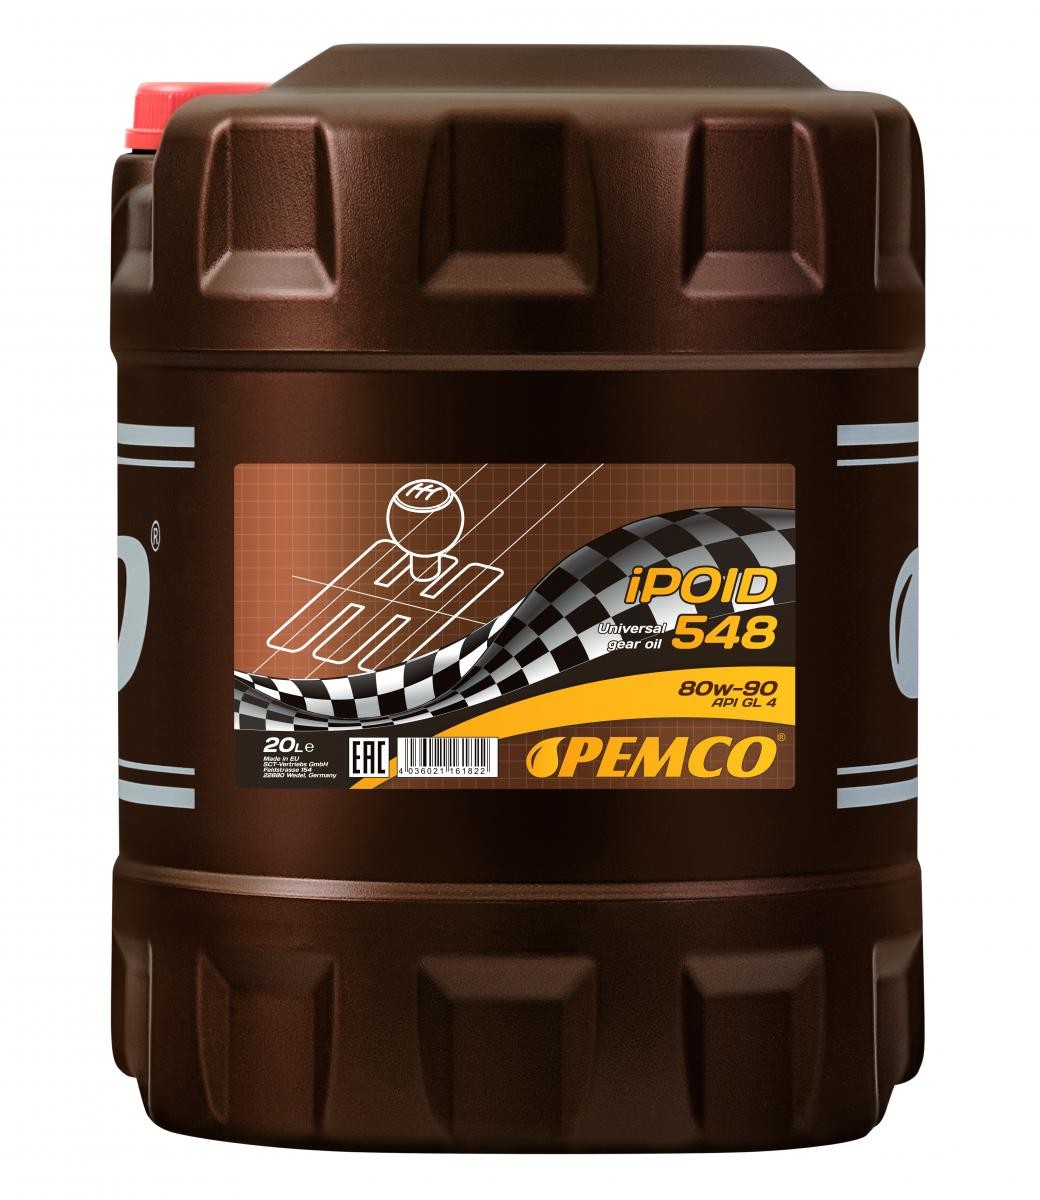 PEMCO iPOID 548 PM0548-20 Manual Transmission Oil Capacity: 20l, 80W-90